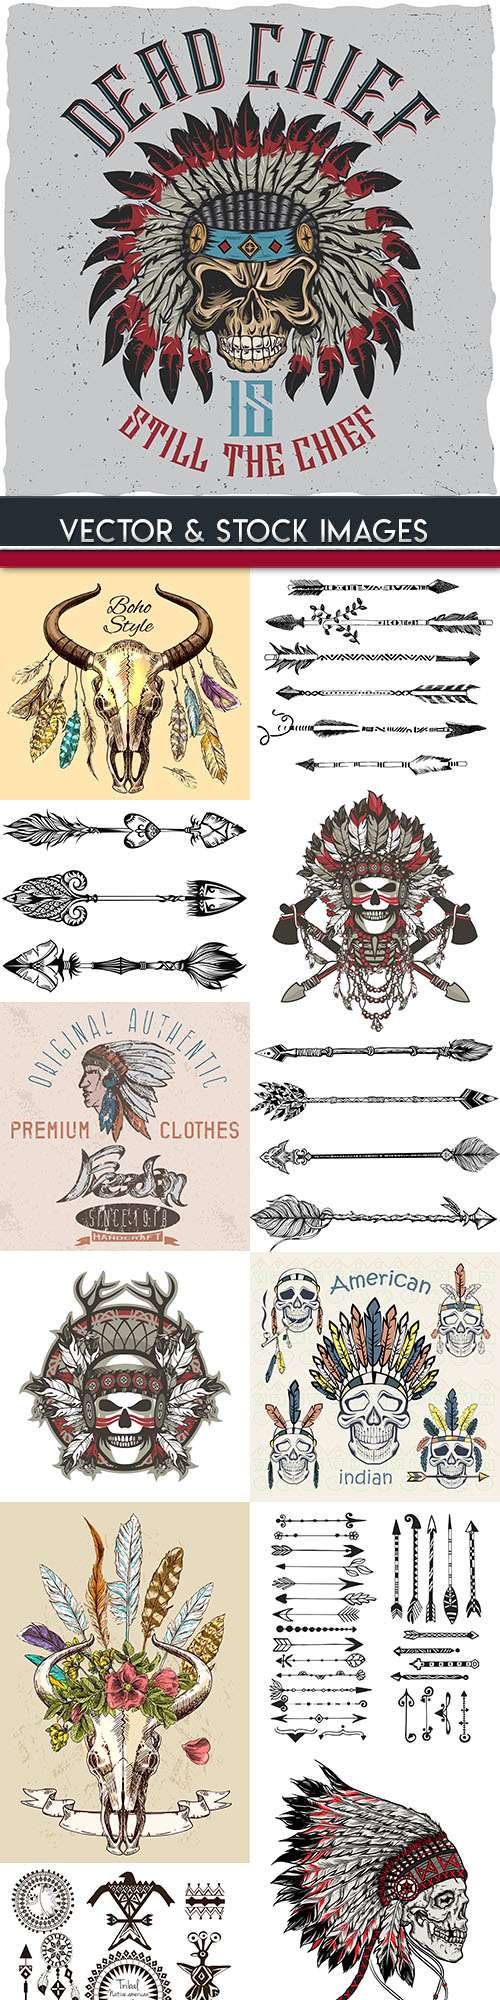 Indian skull and arrows hand drawn illustration